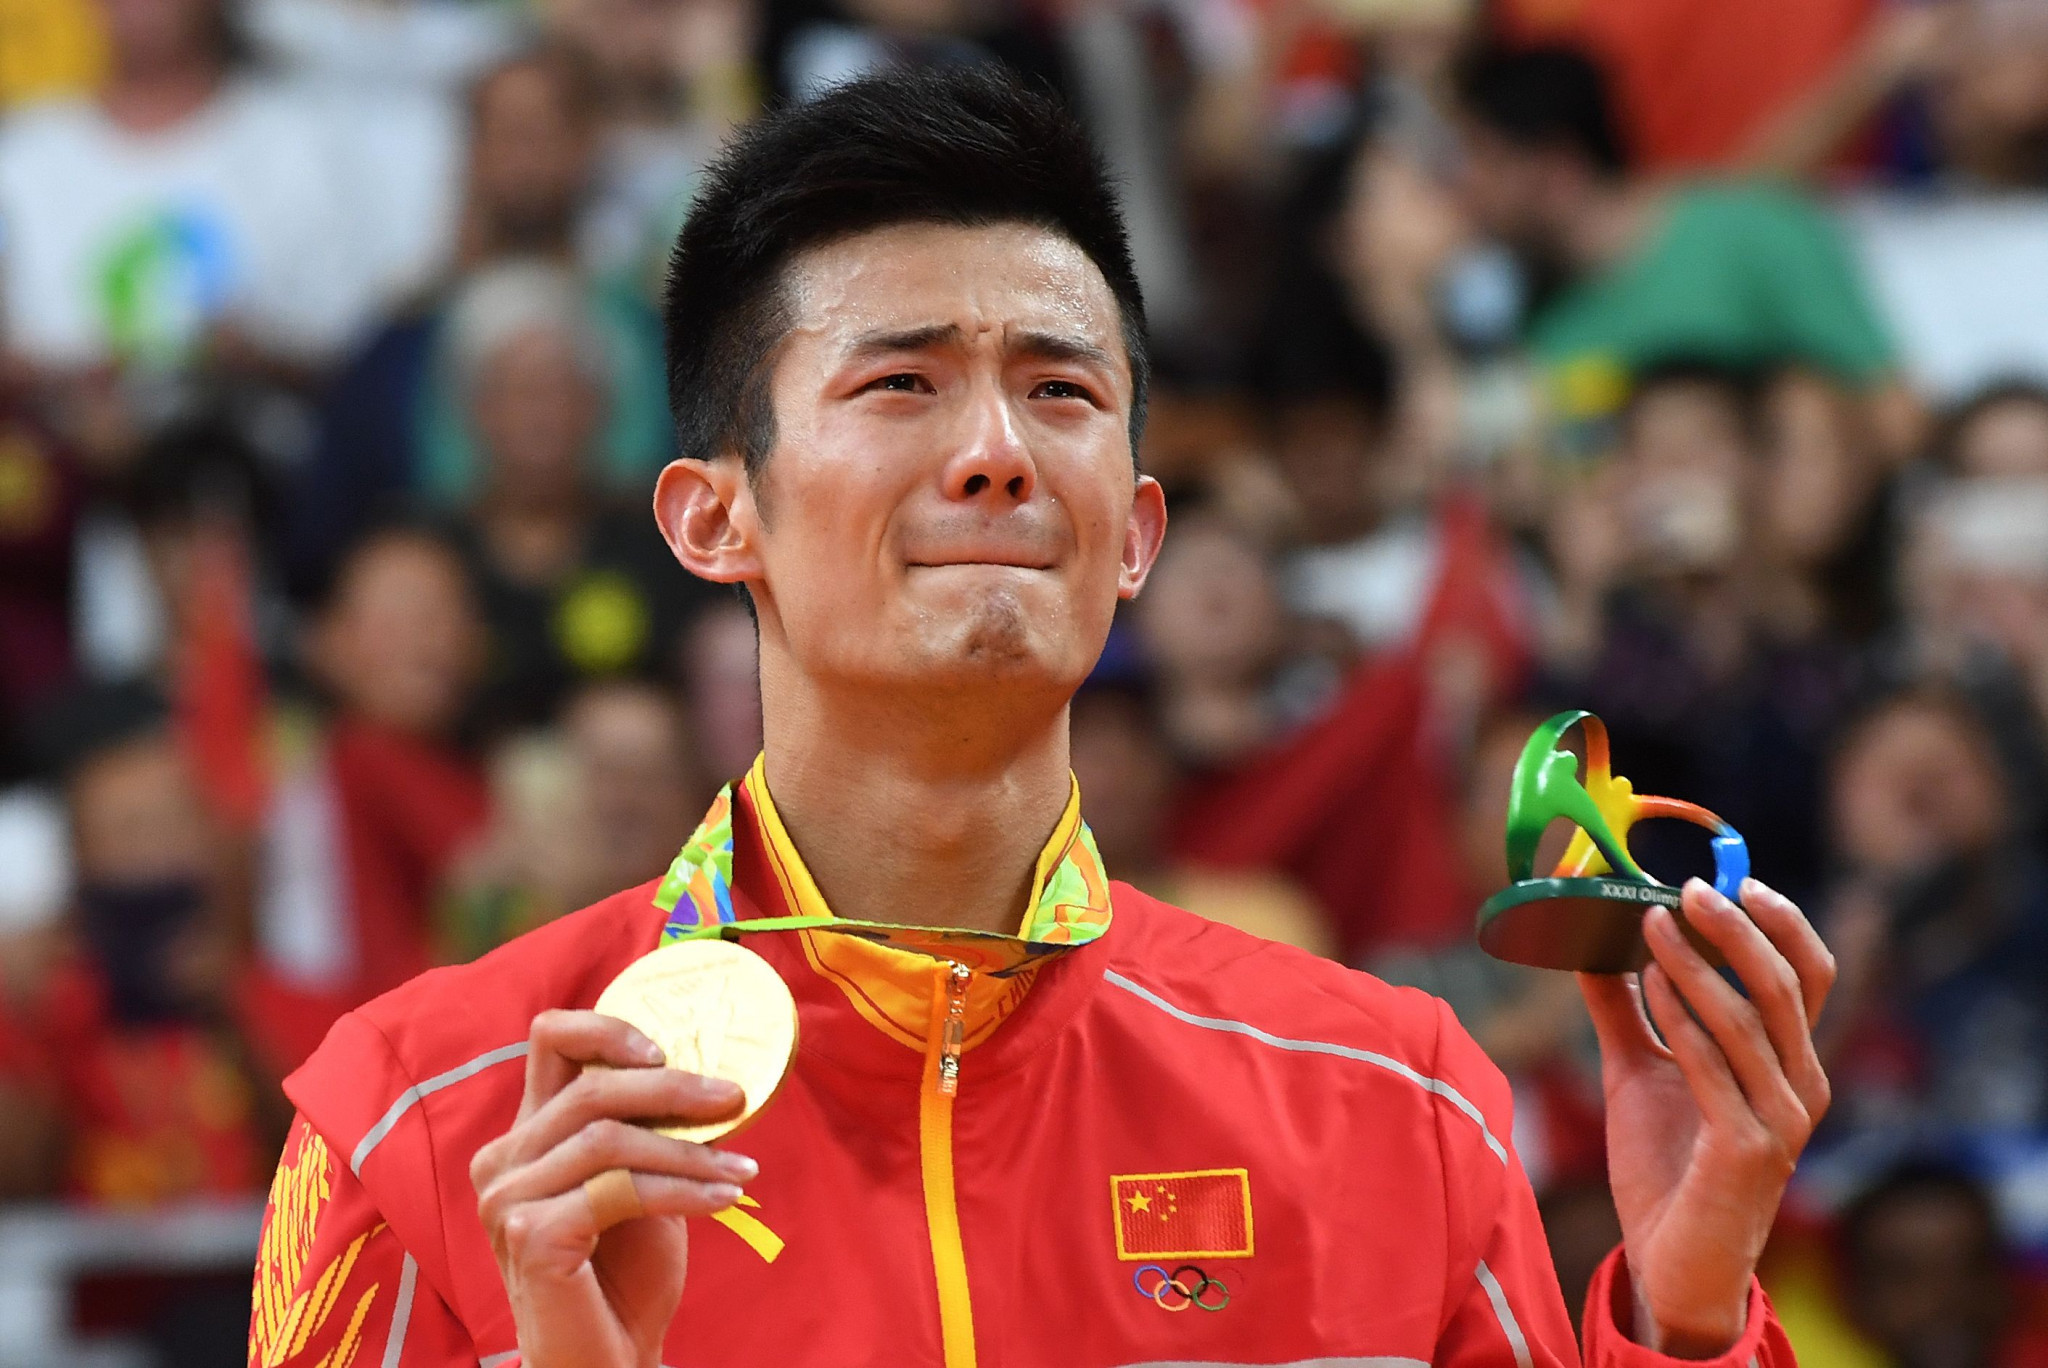 An Olympic gold medal at Rio 2016 was the crowning moment of Chen Long's badminton career ©Getty Images